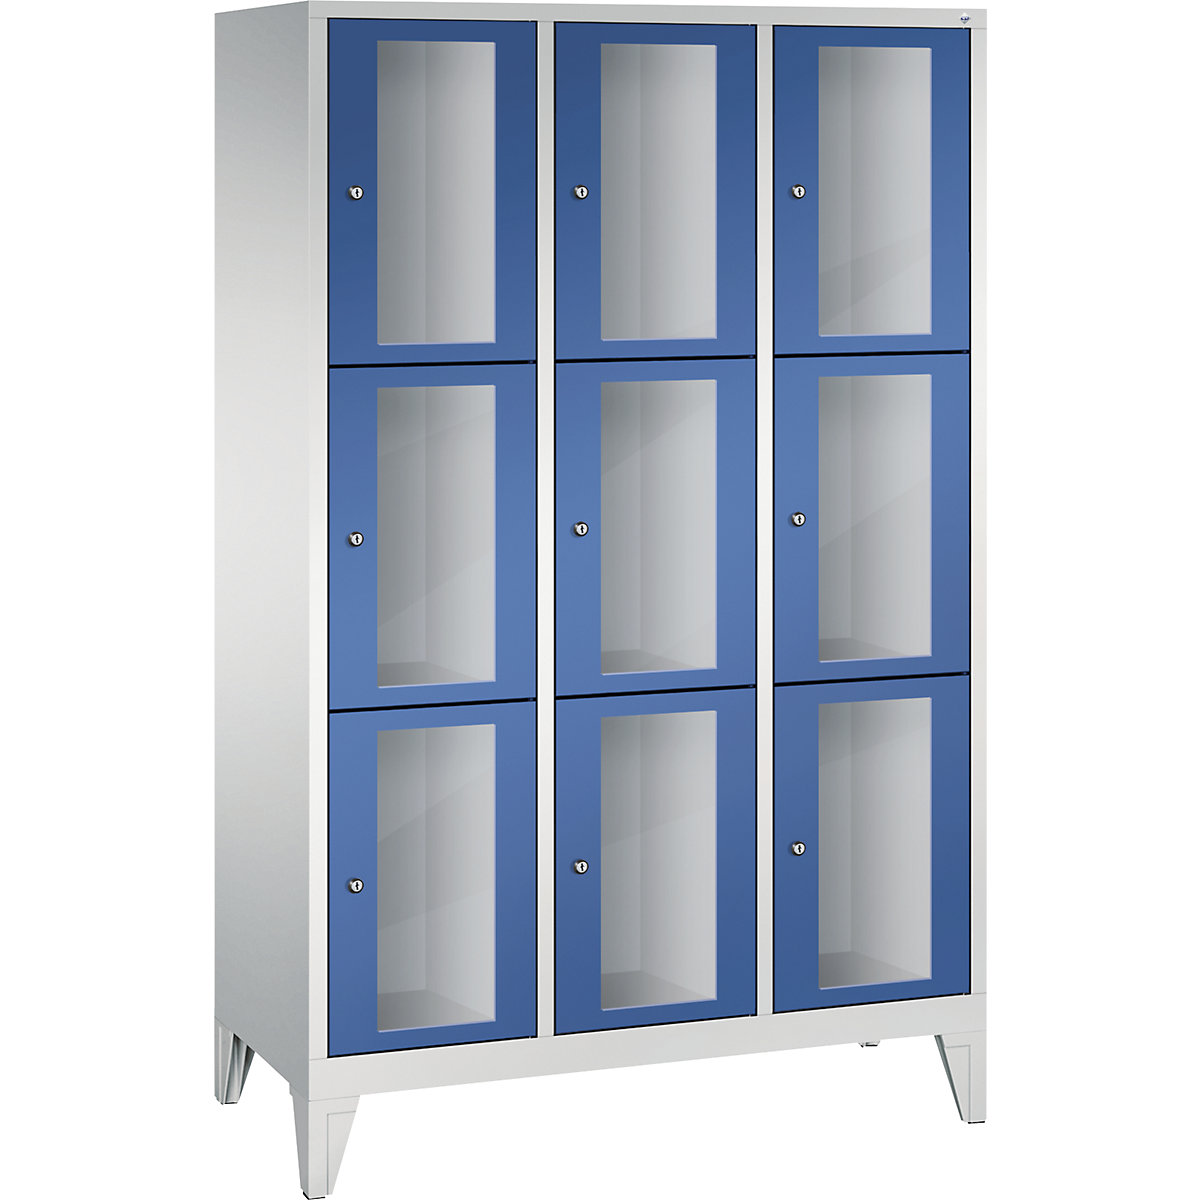 CLASSIC locker unit, compartment height 510 mm, with feet – C+P, 9 compartments, width 1200 mm, gentian blue door-5